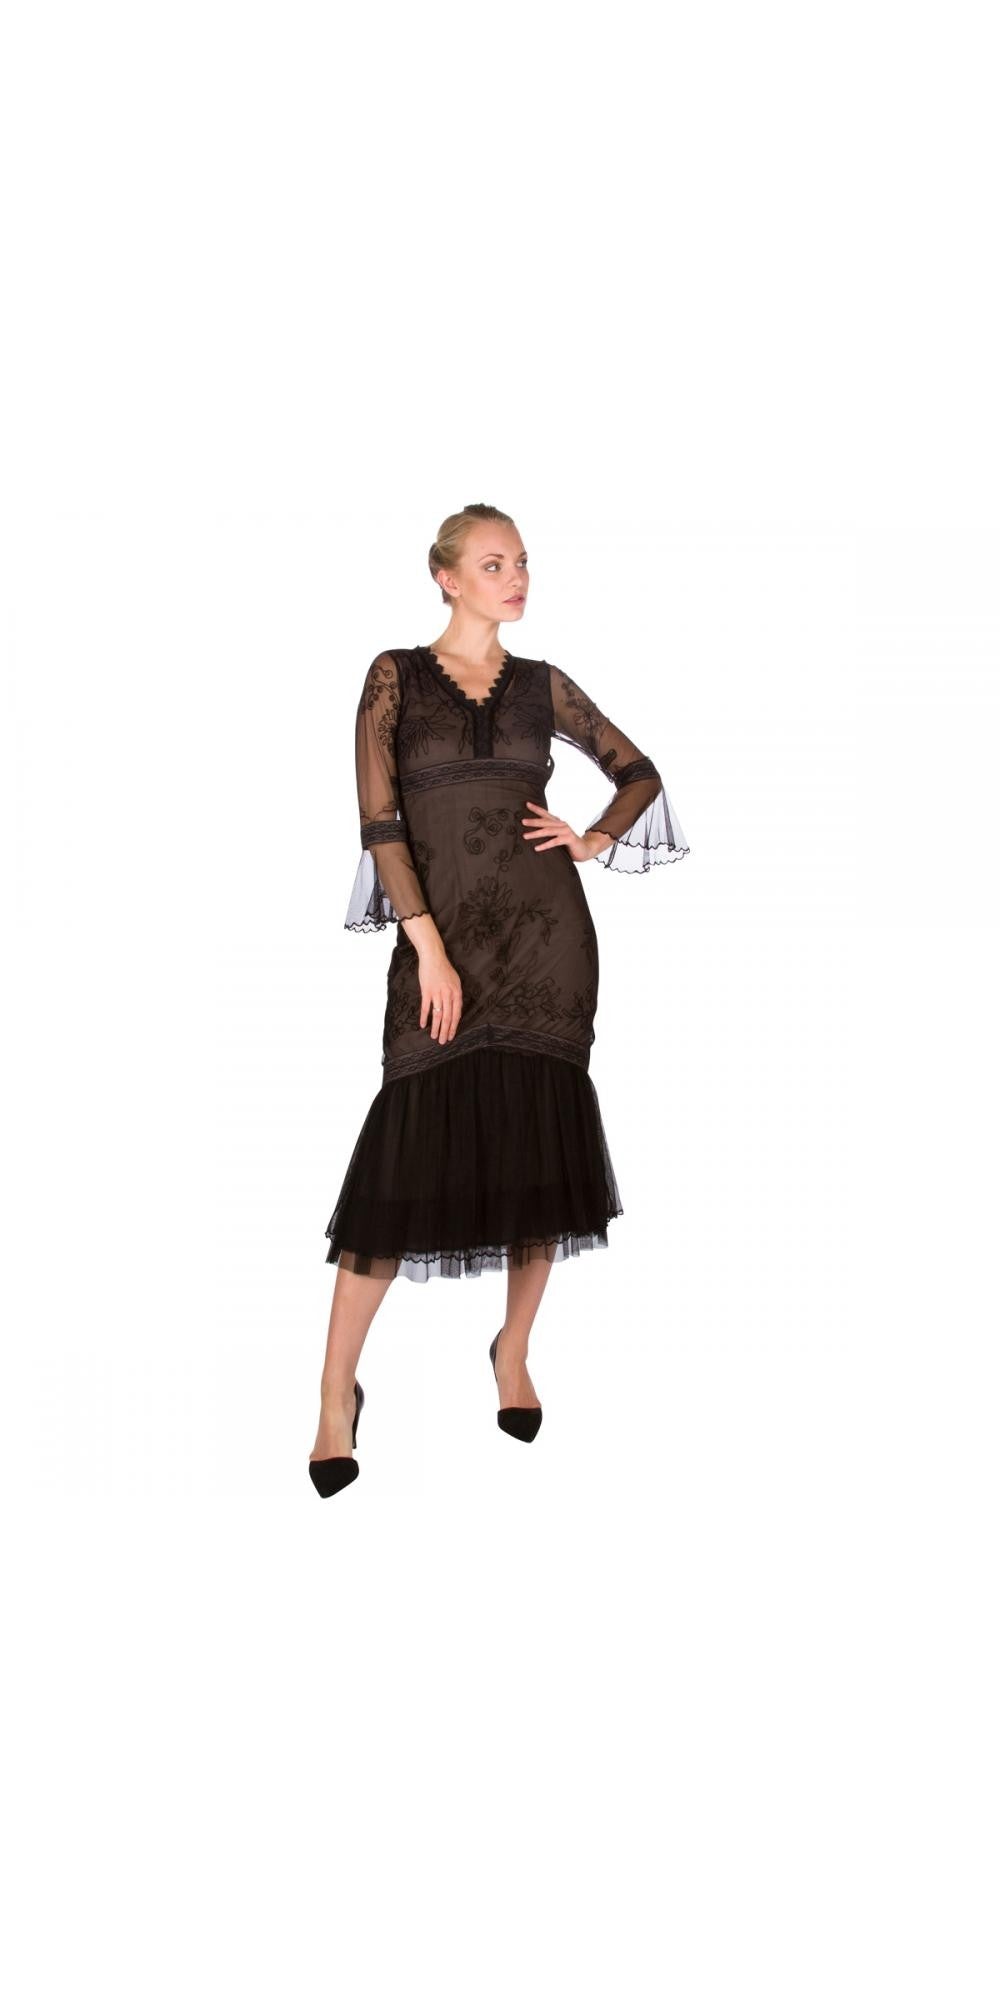 "Dark Romance" Vintage Inspired Party Dress in Black by Nataya - SOLD OUT